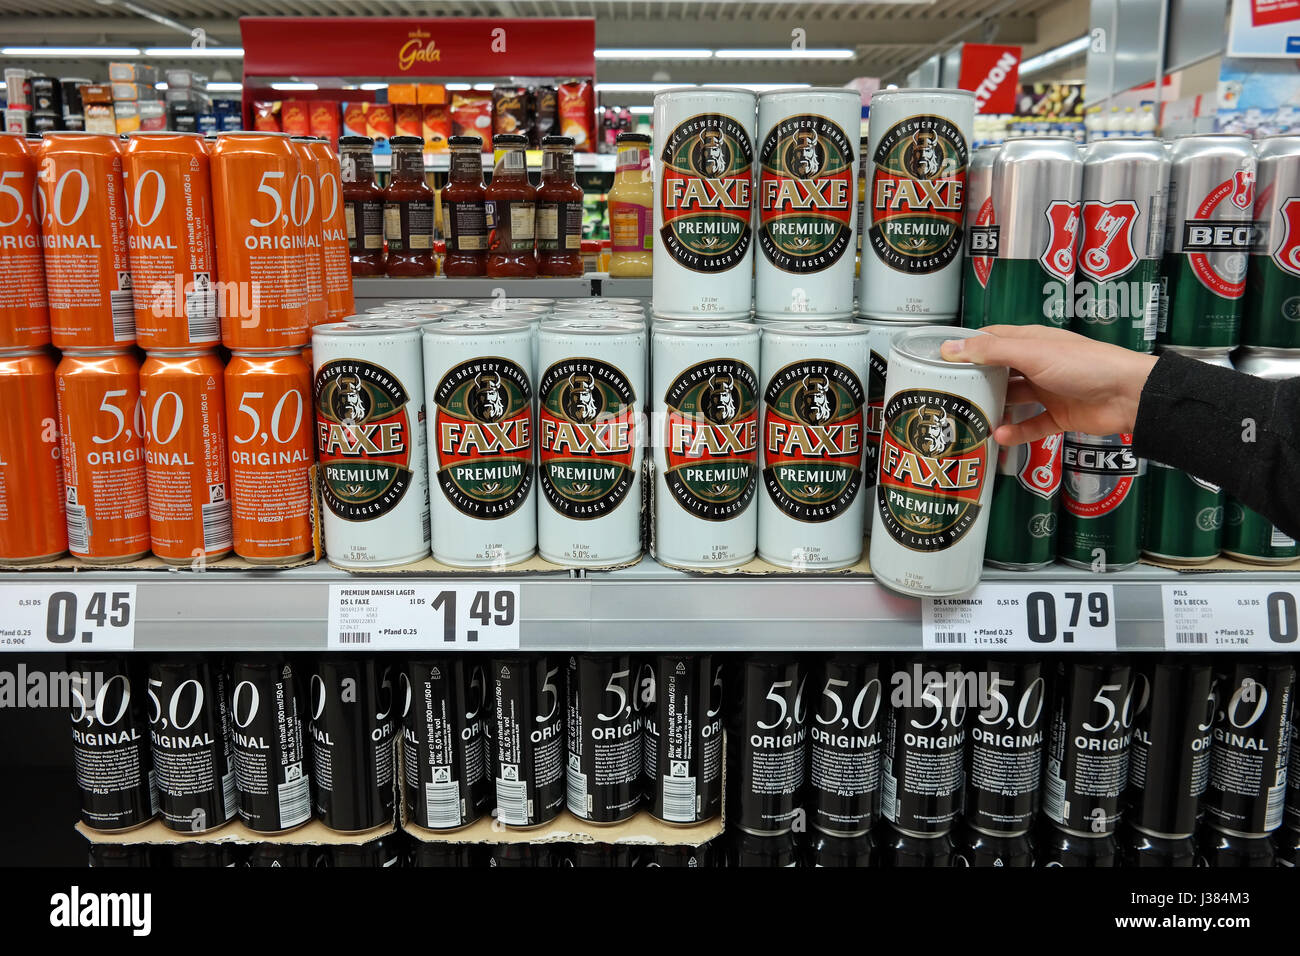 Faxe Premium lager beer cans in a supermarket Stock Photo - Alamy